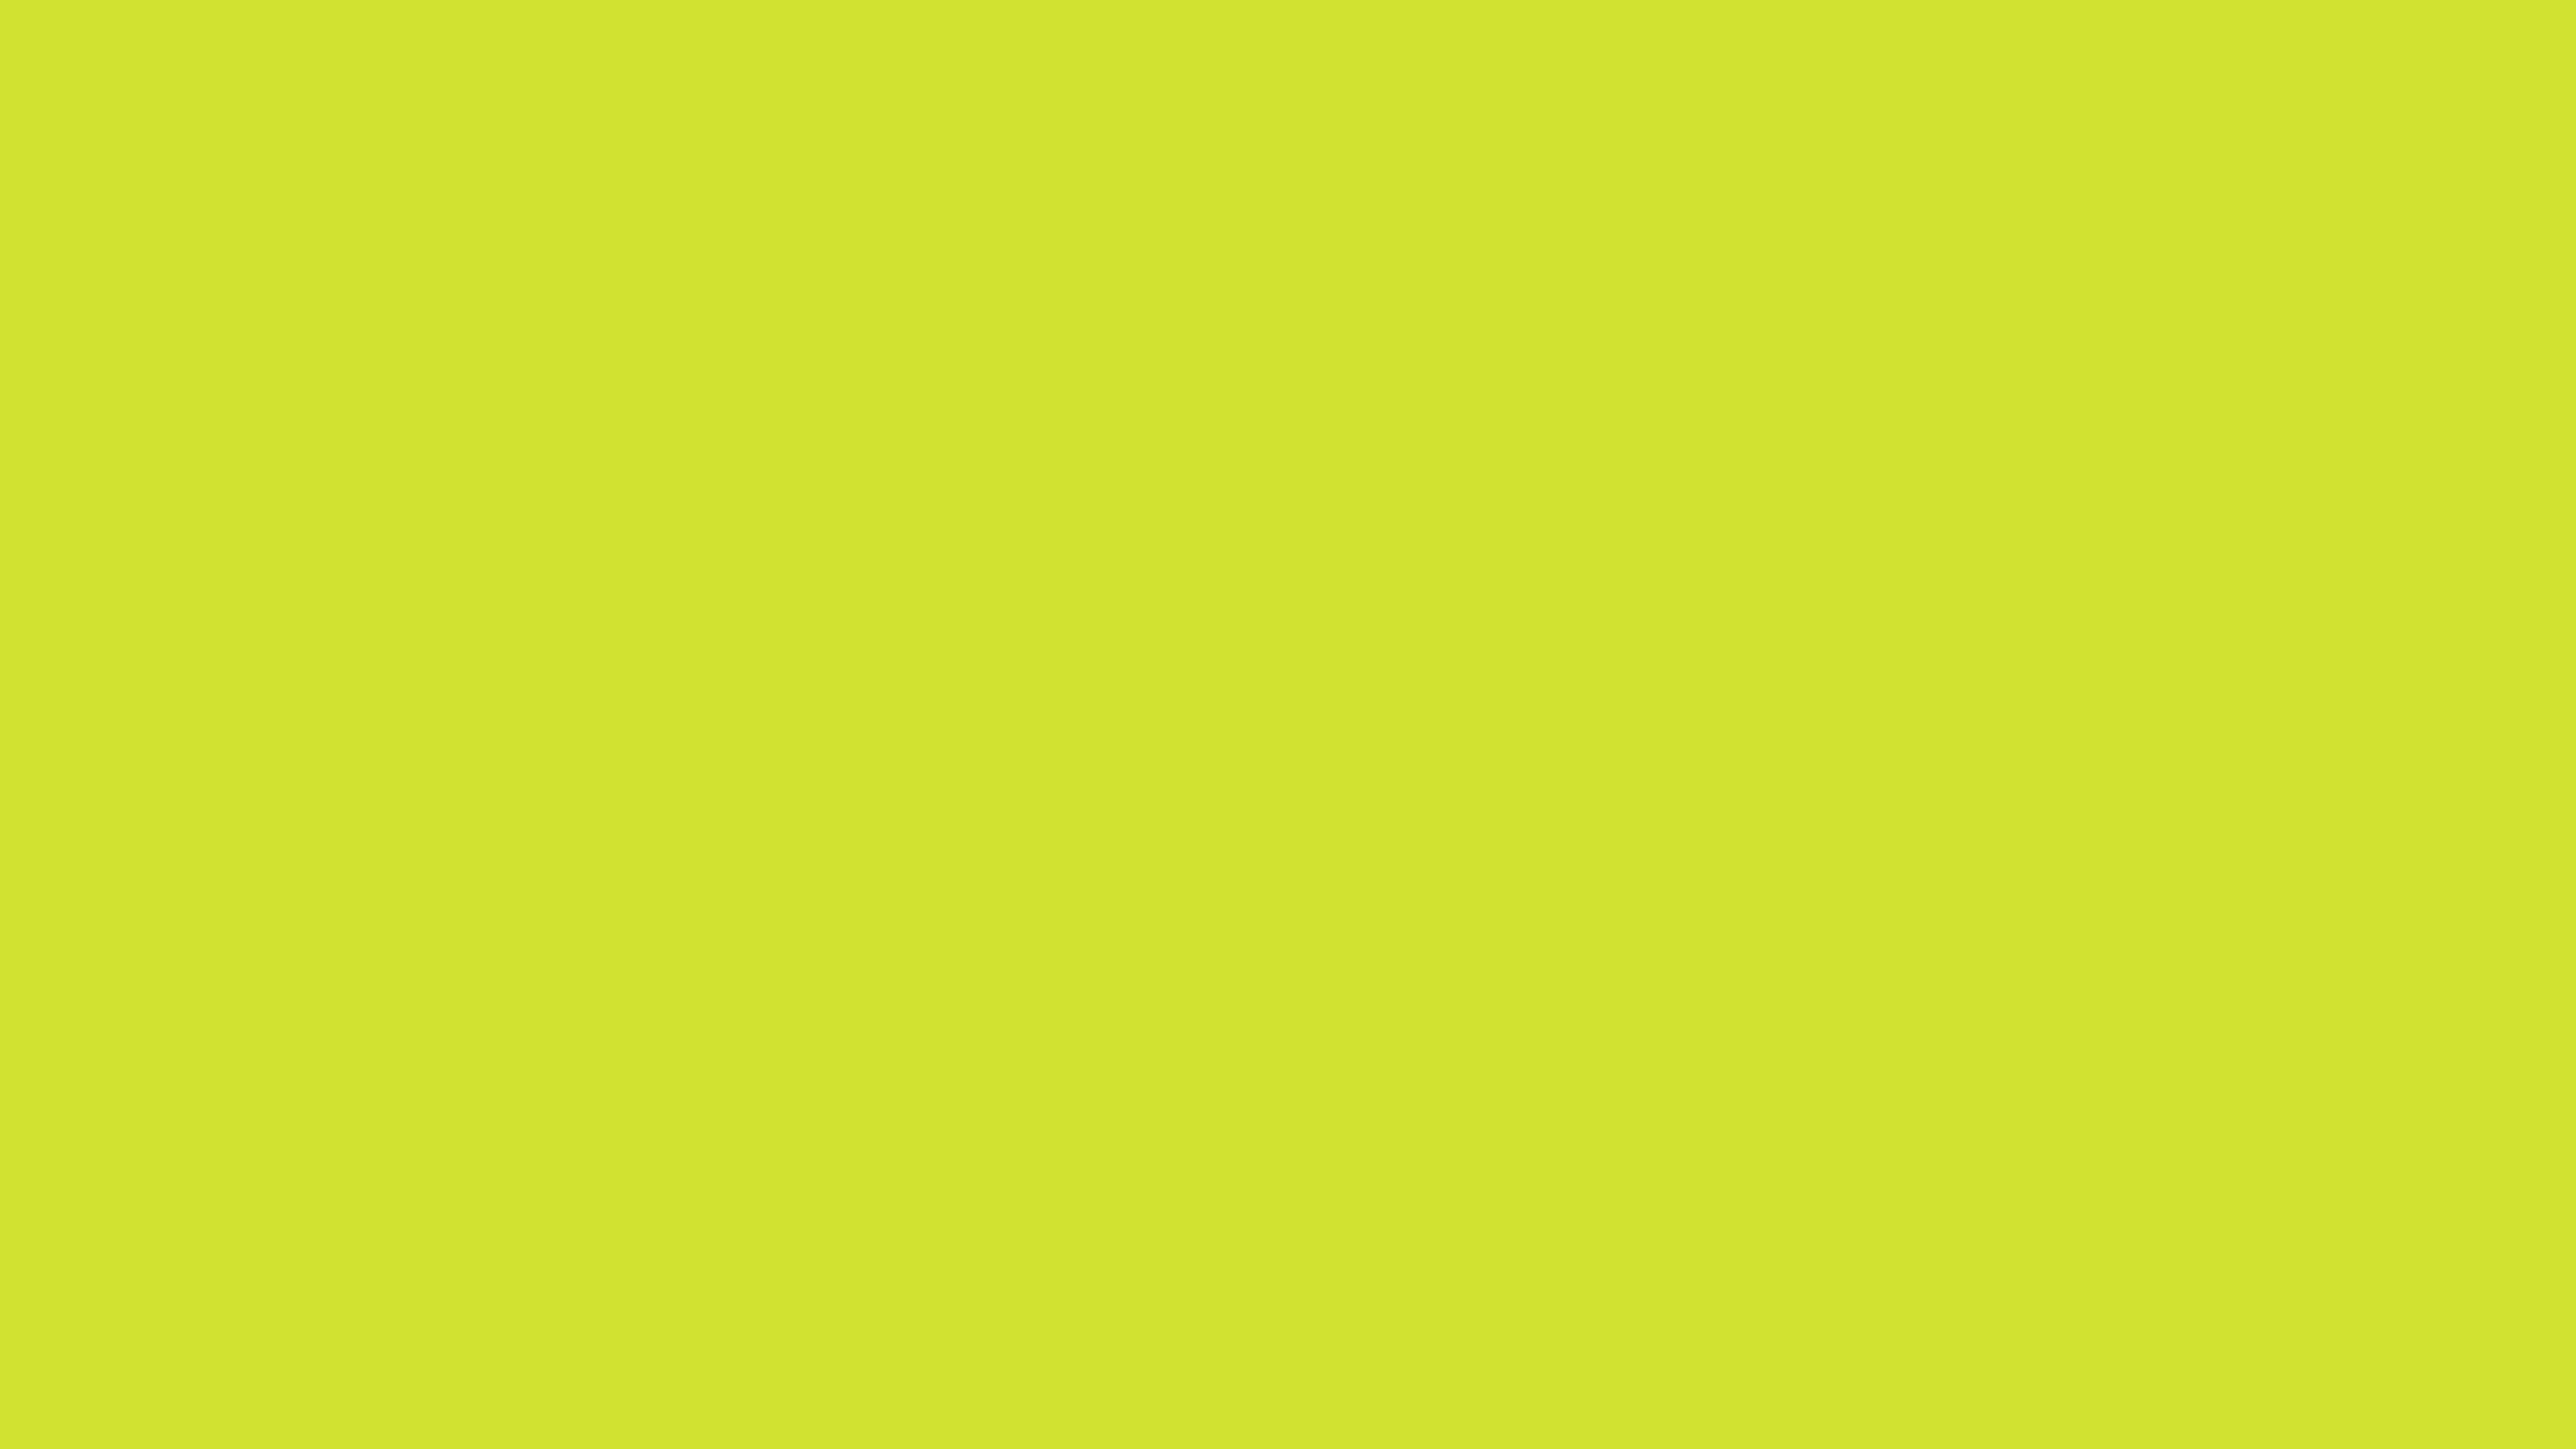 4096x2304 Pear Solid Color Background